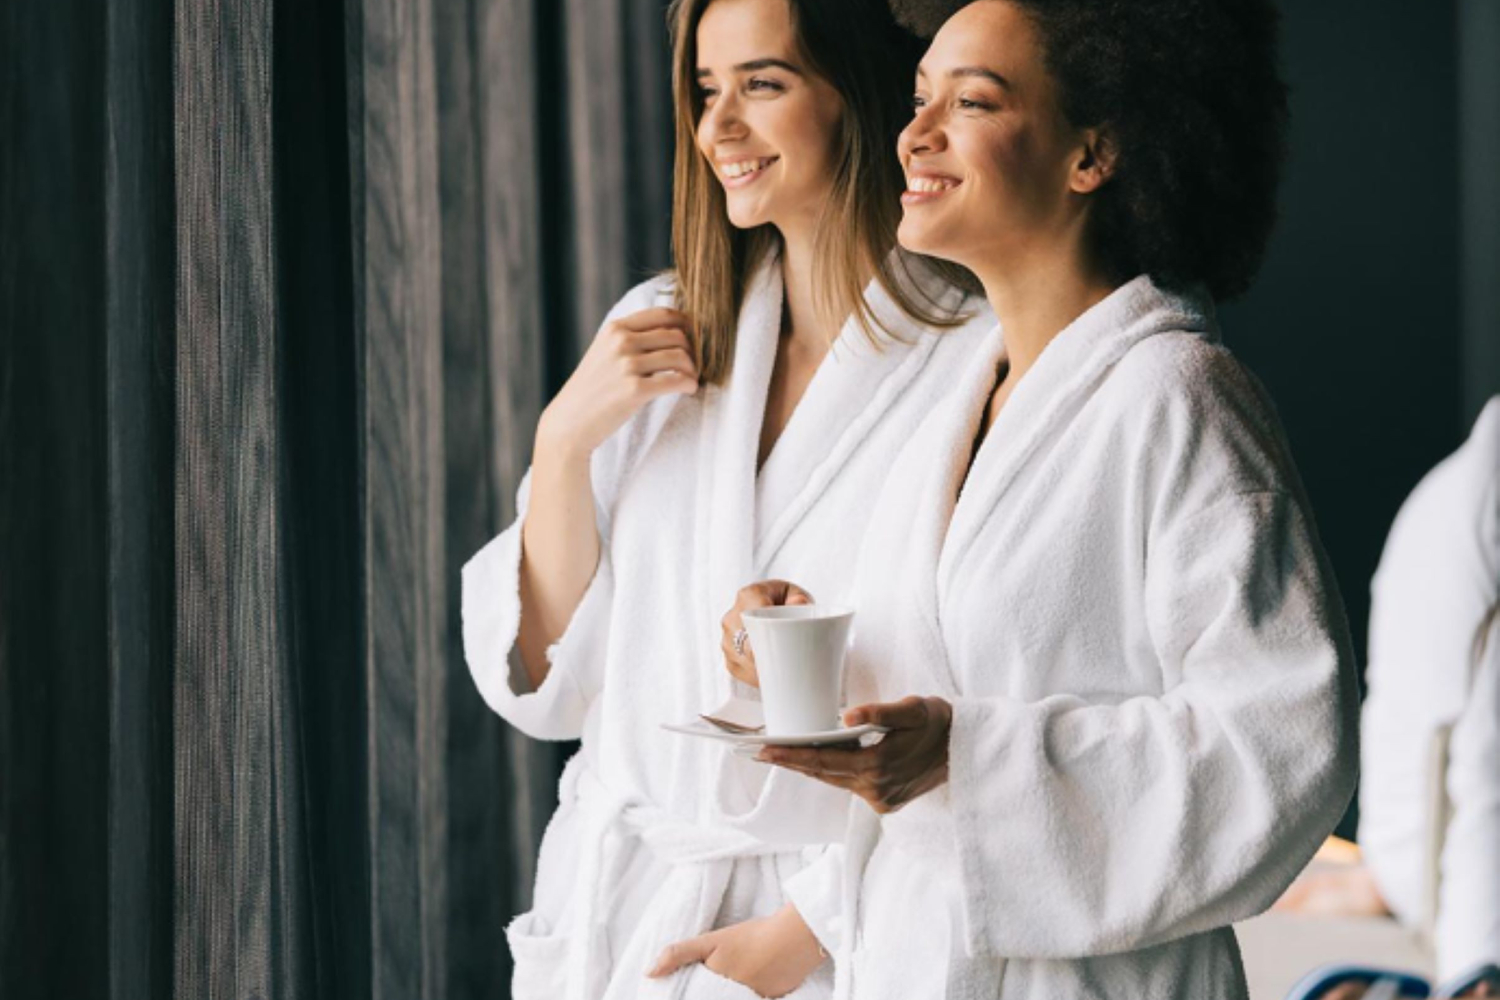 ISPA Study Reveals Trends and Preferences of Spa-Goers 